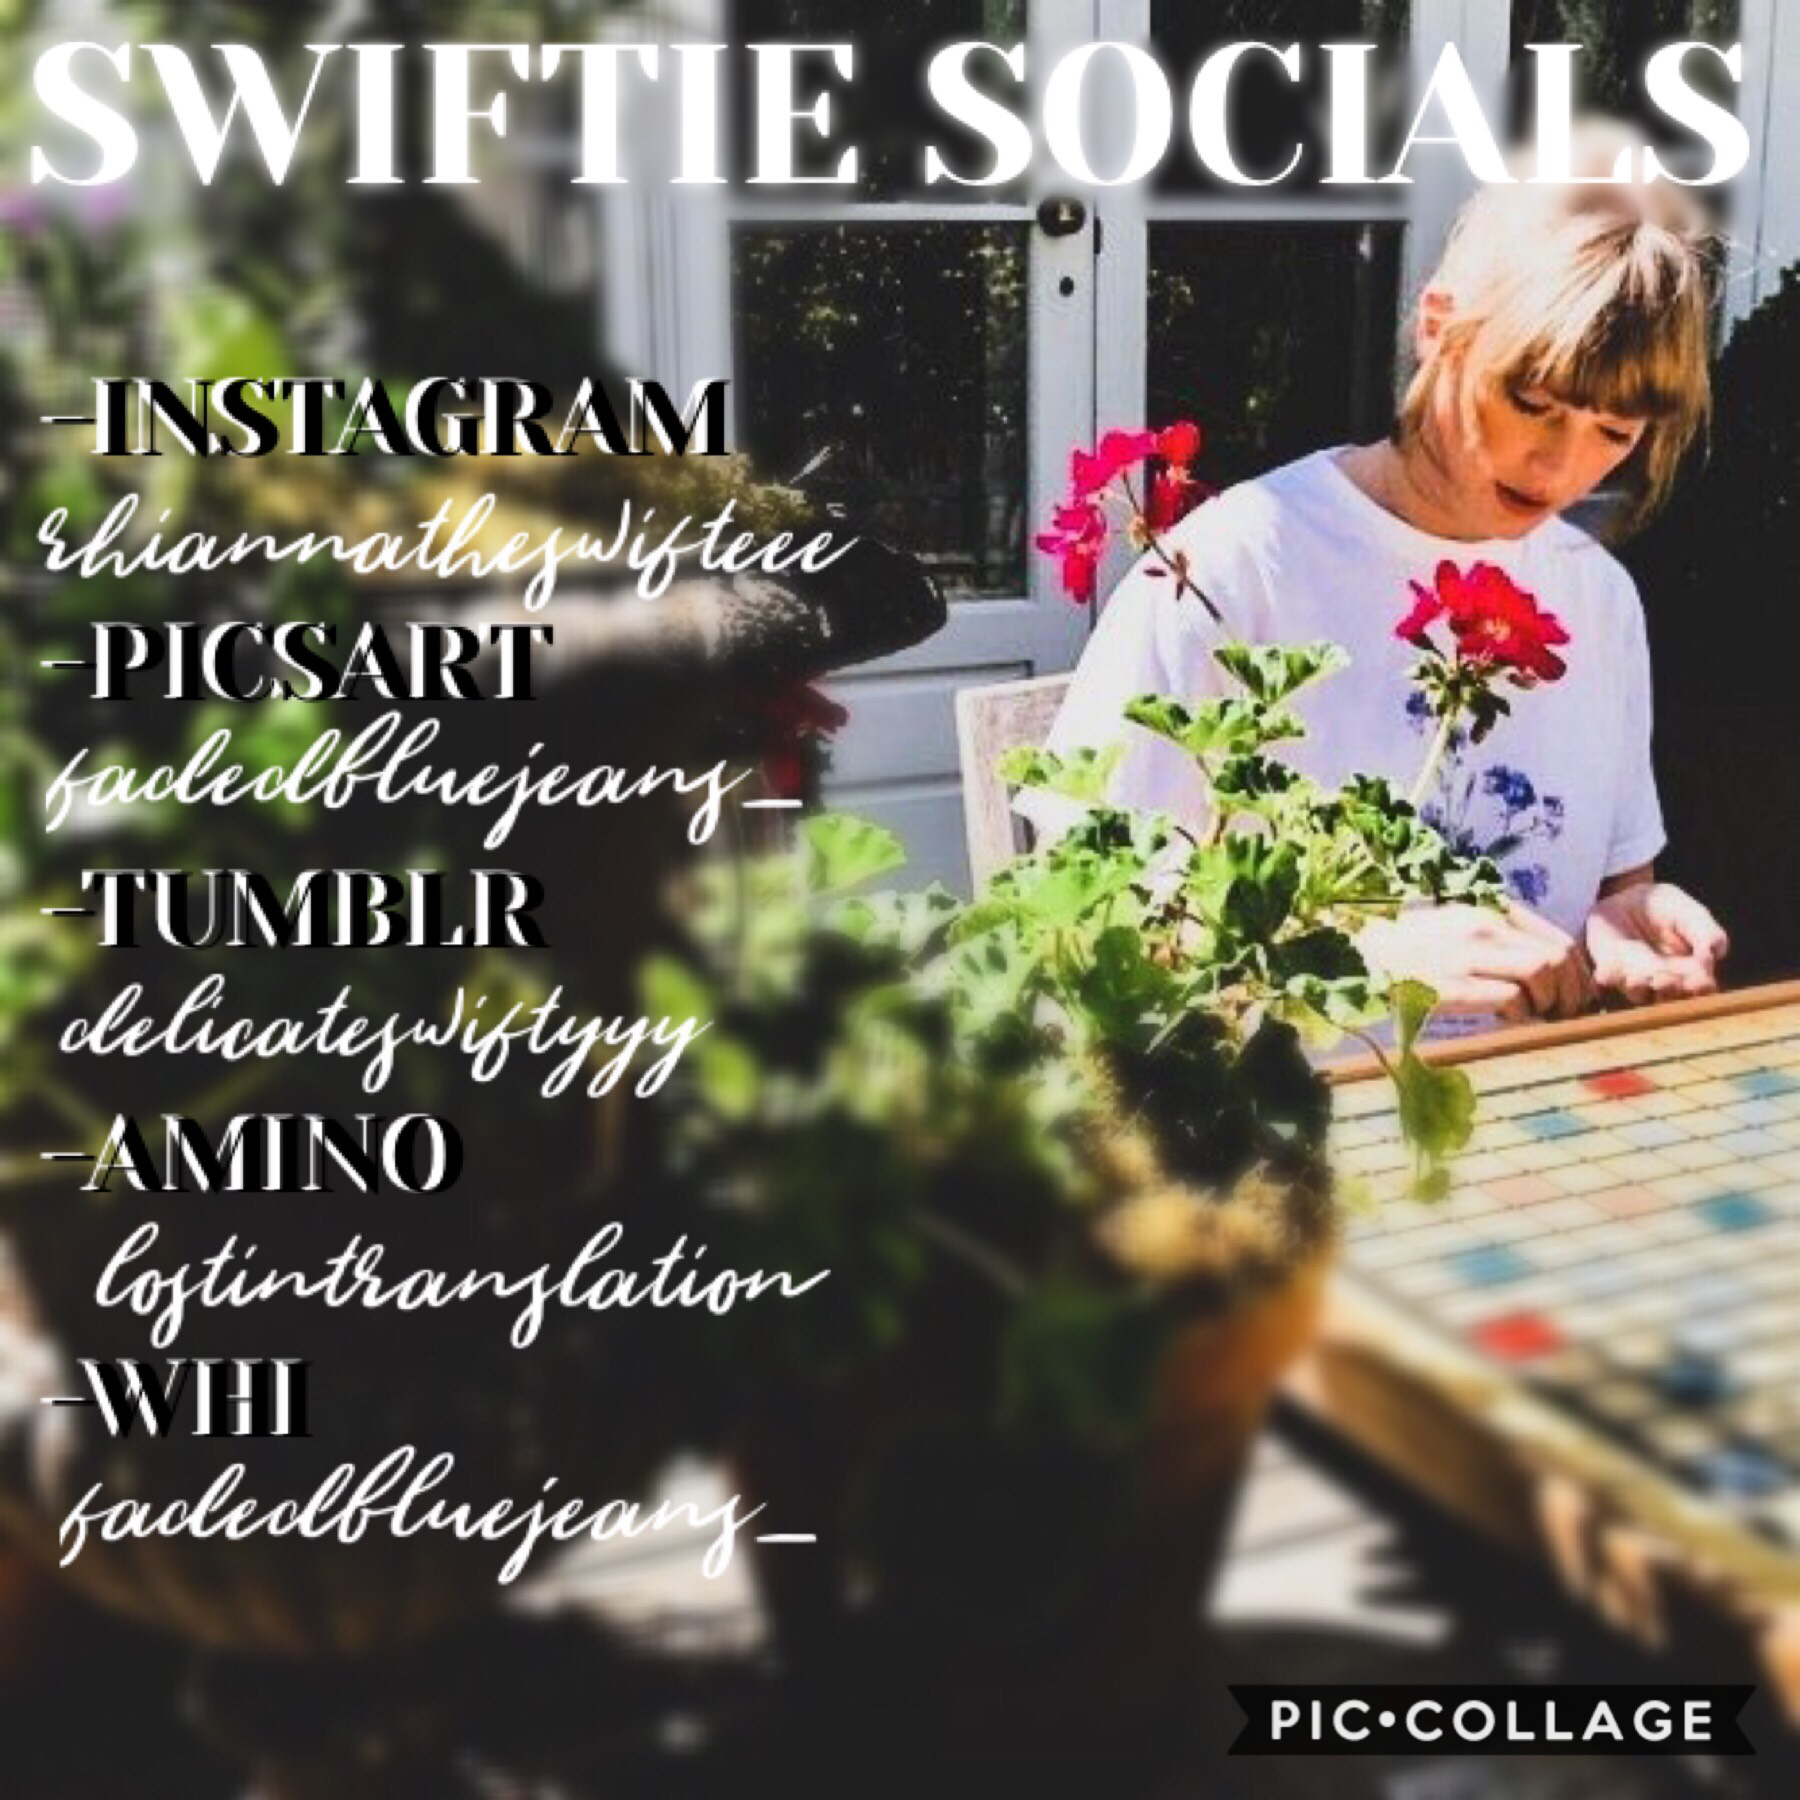 updated version of all my swiftie acc’s across different platforms!
you can contact me on any of them ( I’m most active on insta or amino) 

MUCH MUCH MUCH LOVE 💗
 
you kiddos are amazing 💗